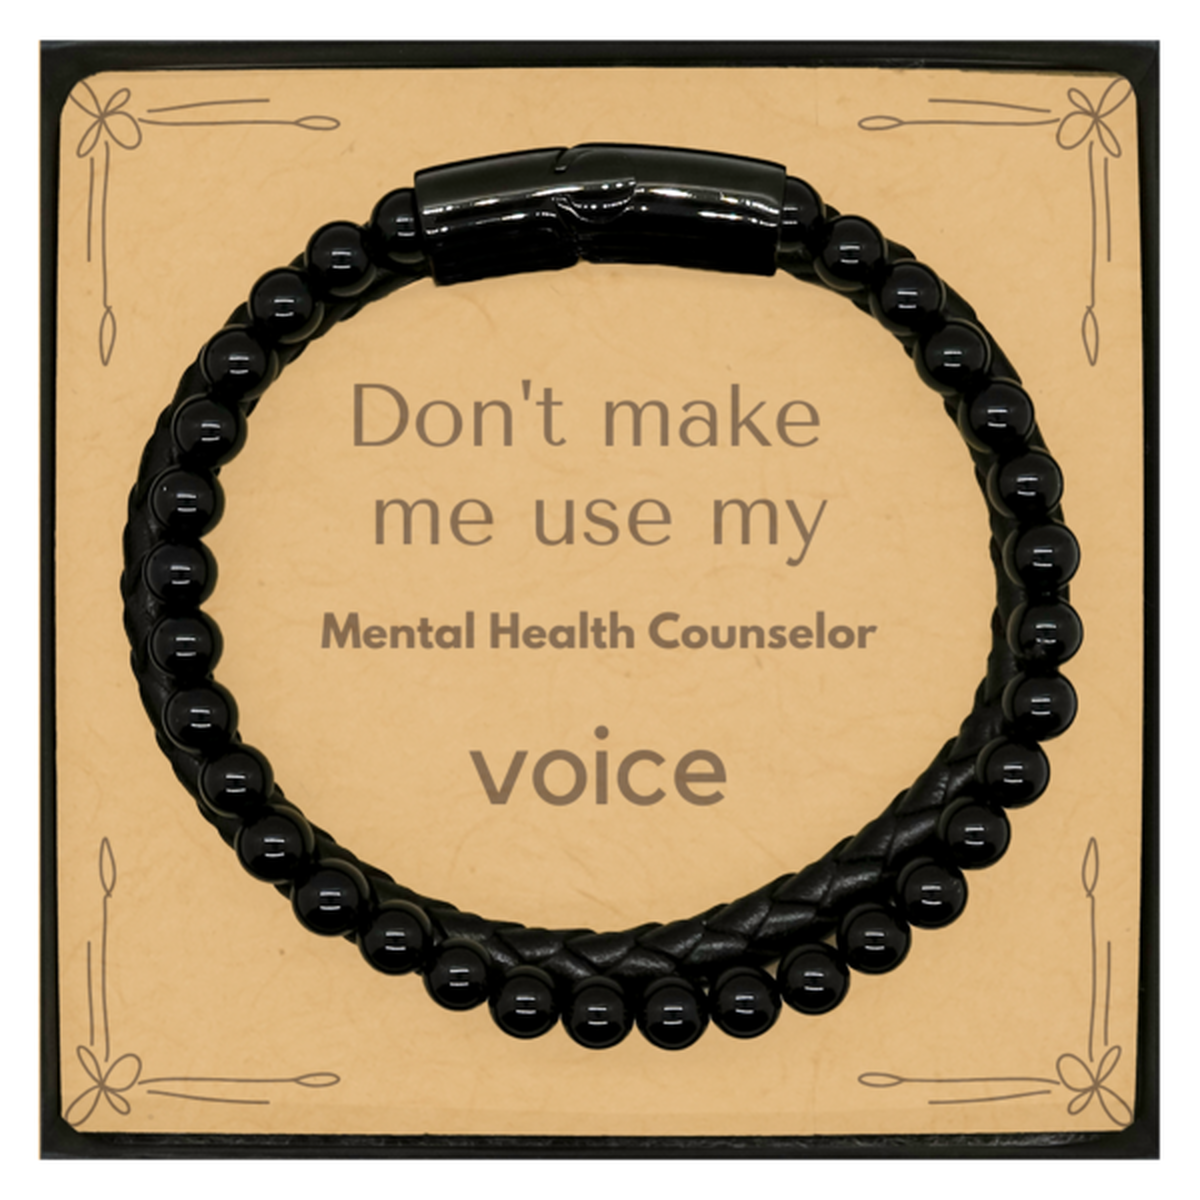 Don't make me use my Mental Health Counselor voice, Sarcasm Mental Health Counselor Card Gifts, Christmas Mental Health Counselor Stone Leather Bracelets Birthday Unique Gifts For Mental Health Counselor Coworkers, Men, Women, Colleague, Friends